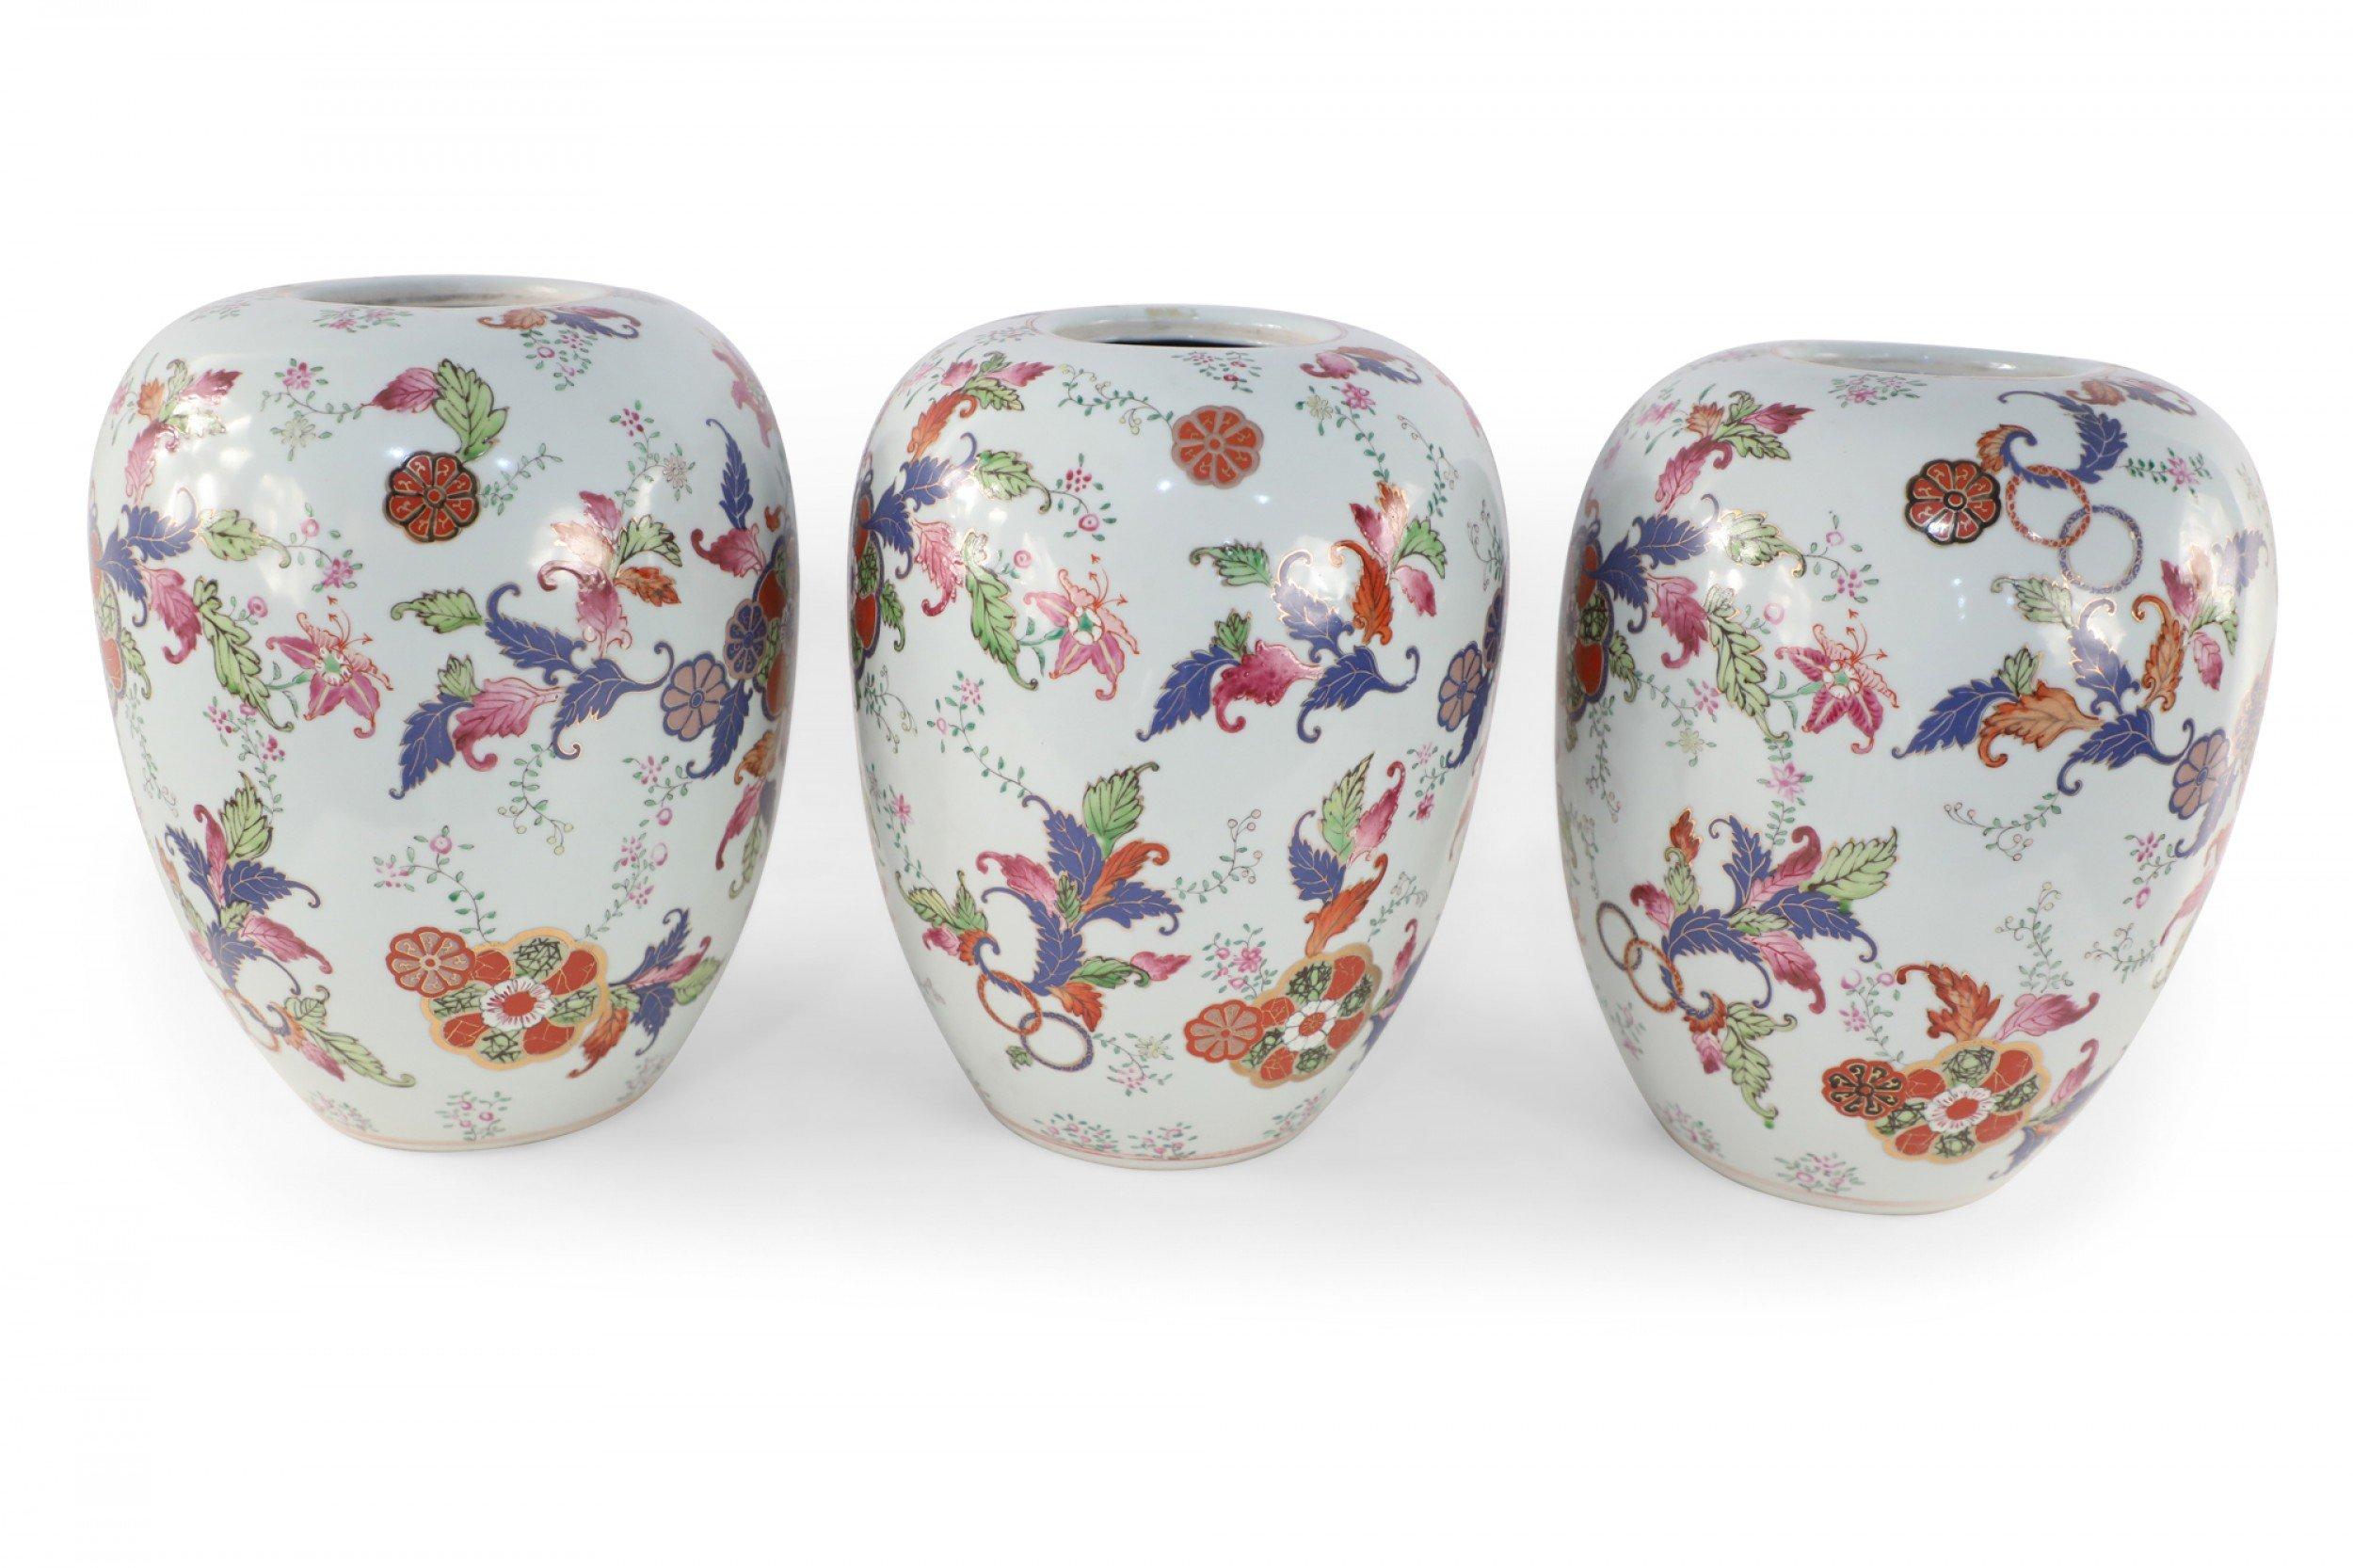 5 Chinese white porcelain, open-mouthed jars decorated in an all-over pattern of florals and foliage in purple, orange and green, accented with gold lotus flowers (Priced each).
 